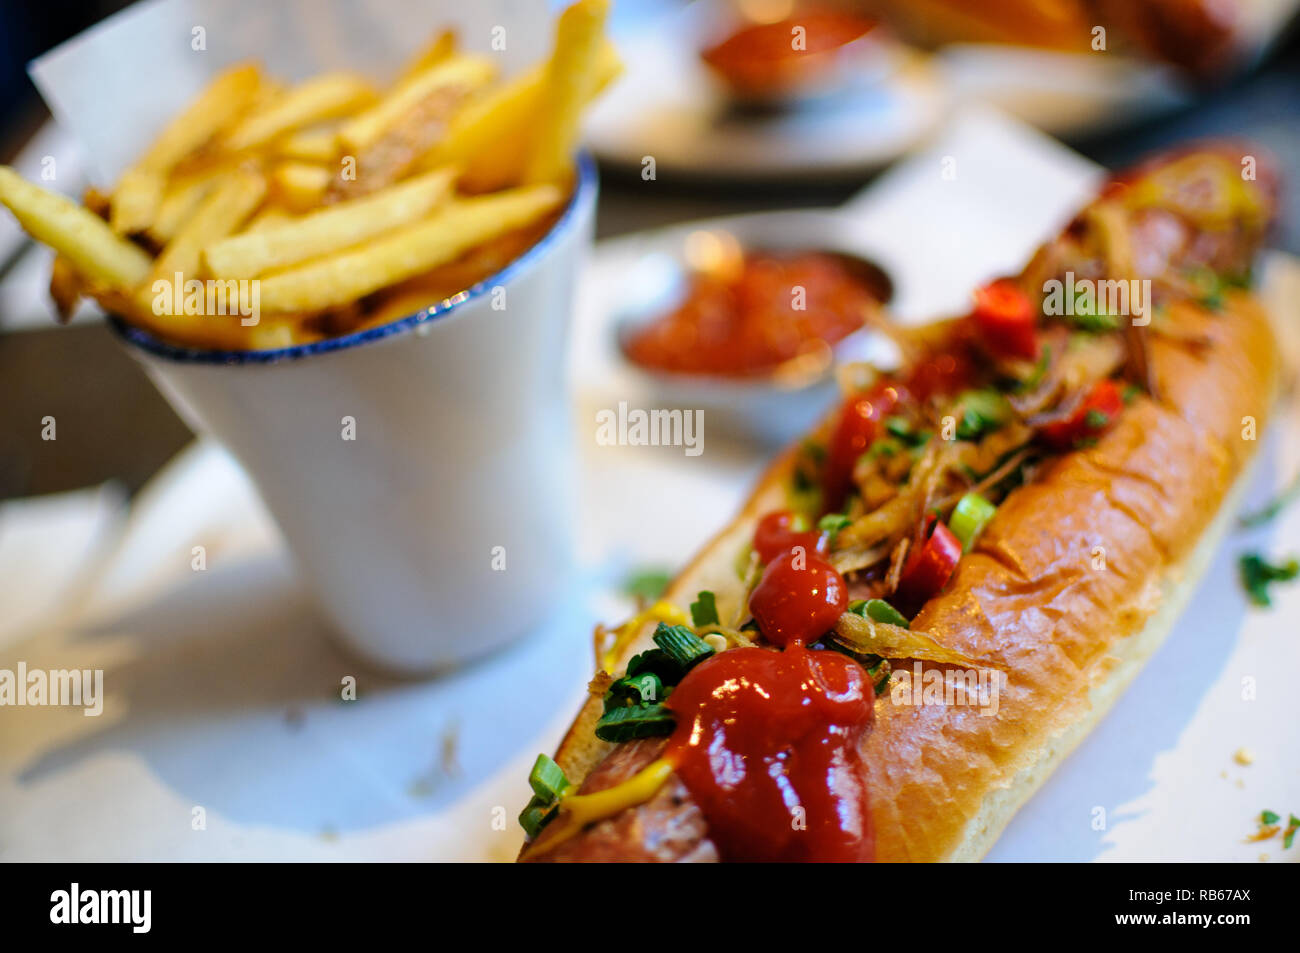 A close-up of a classic hot dog covered in tomato ketchup, mustard, crispy onions and chives with fries / chips in the background softly out of focus. Stock Photo